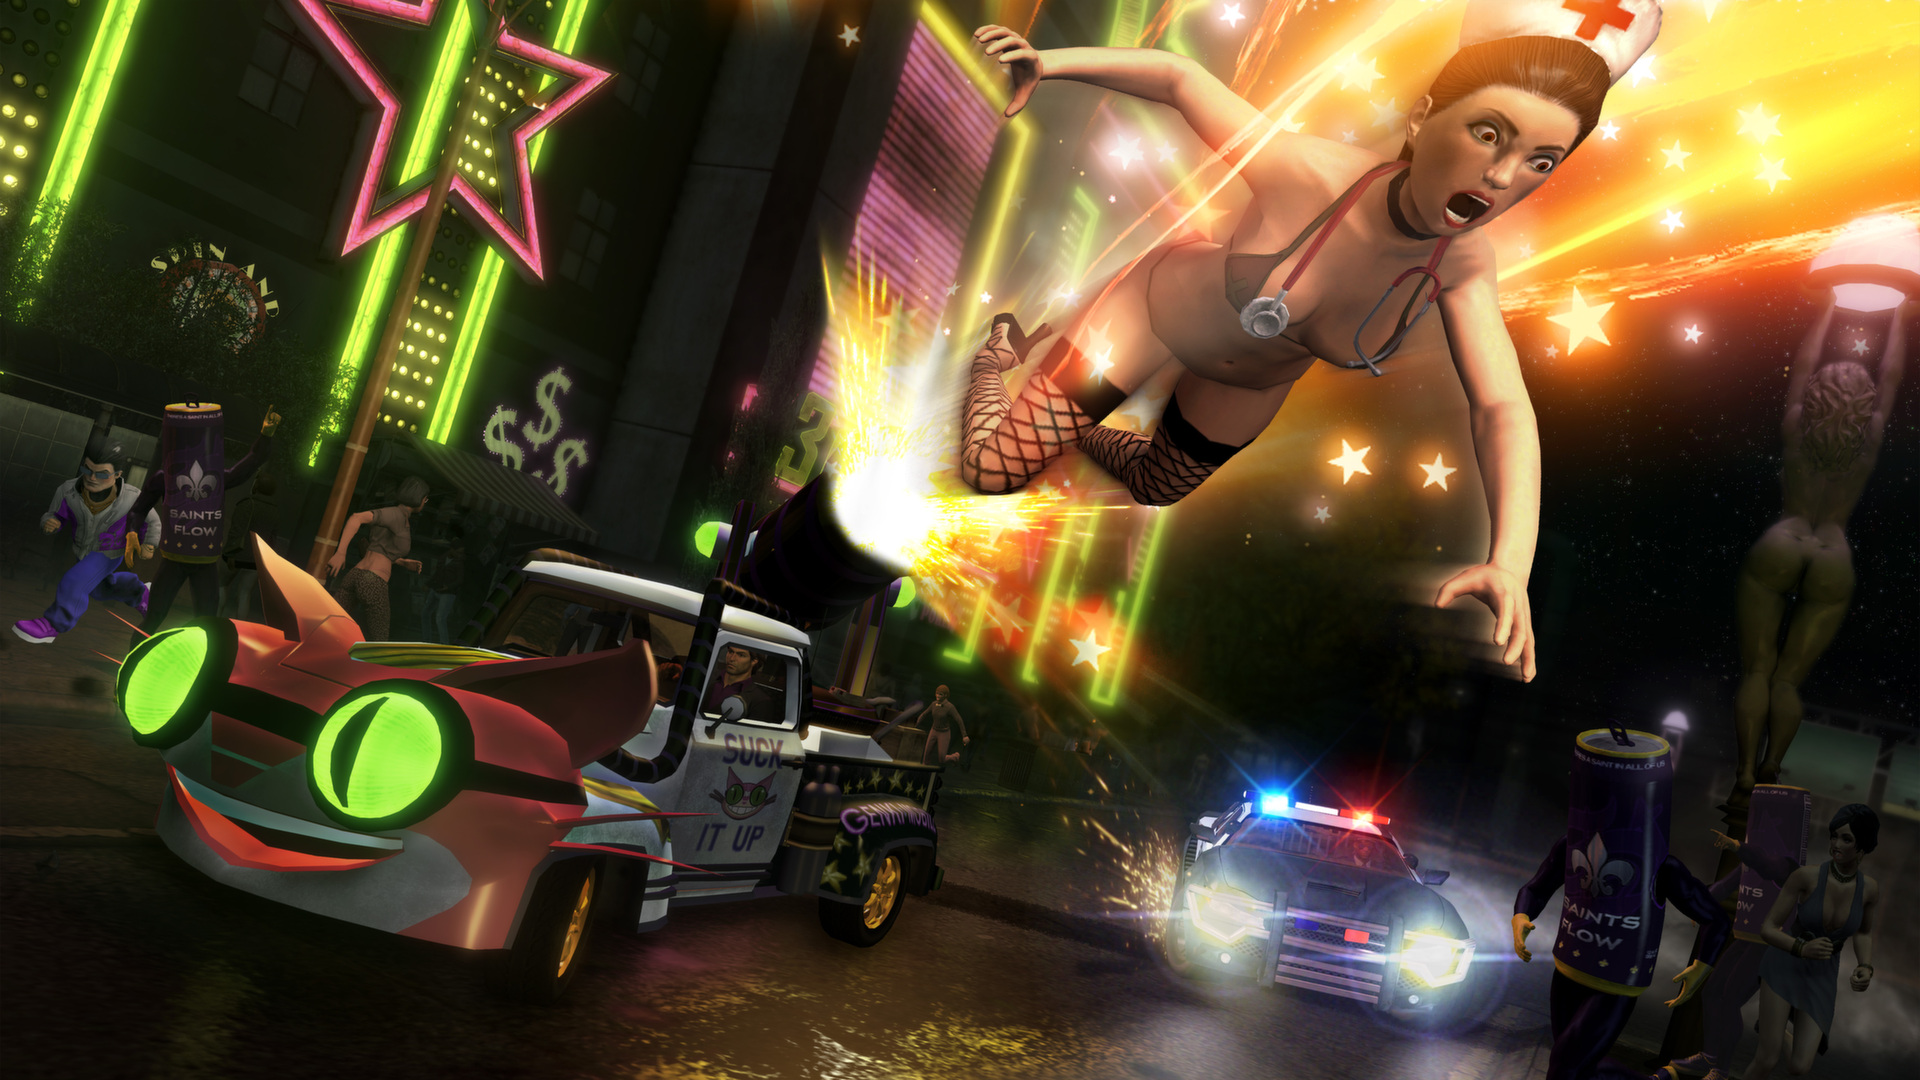 Saints Row: The Third - FUNTIME! Pack Featured Screenshot #1